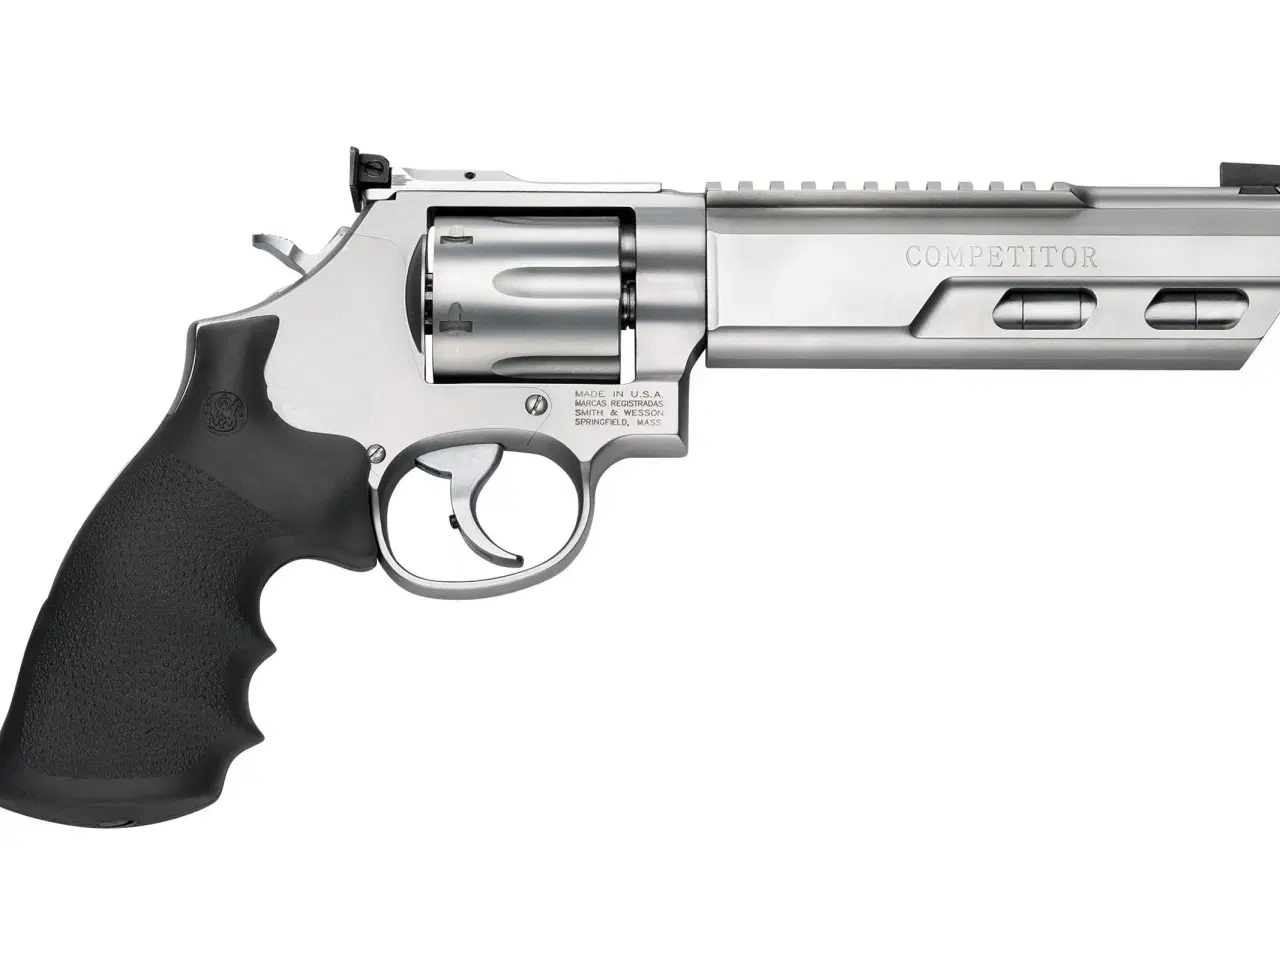 Billede 1 - Smith & Wesson 686 Competitor 357 mag